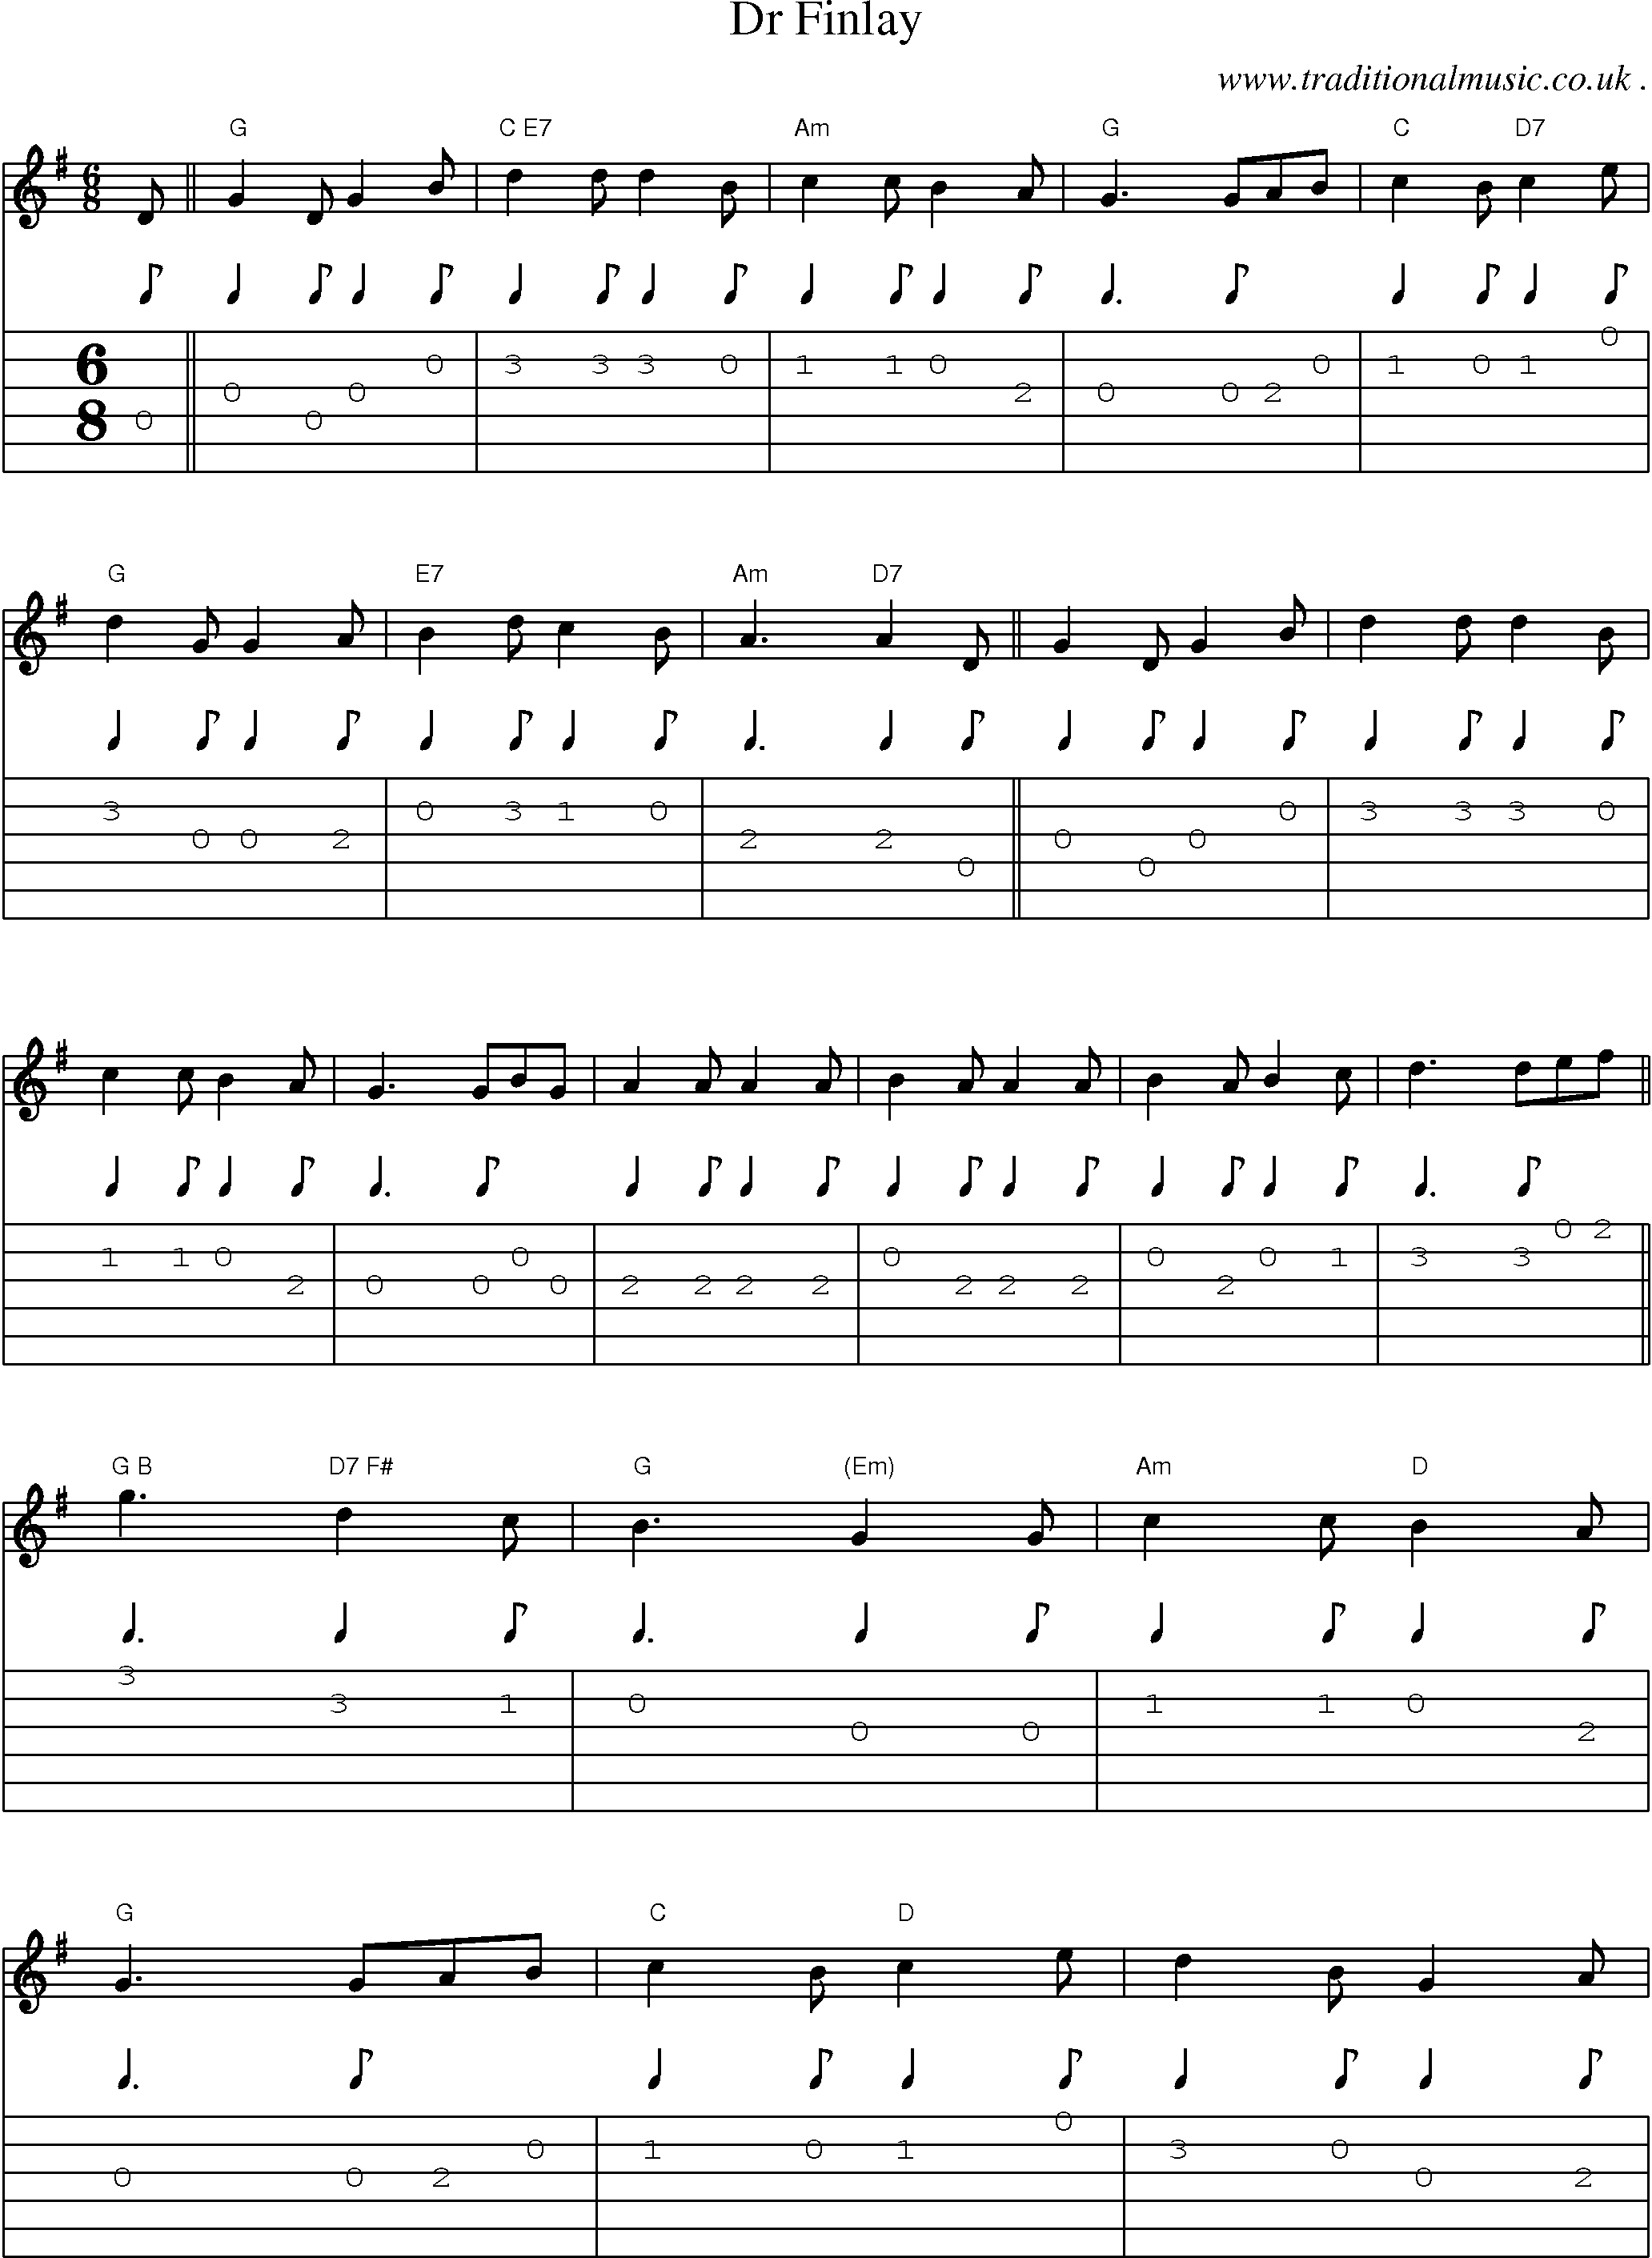 Sheet-music  score, Chords and Guitar Tabs for Dr Finlay